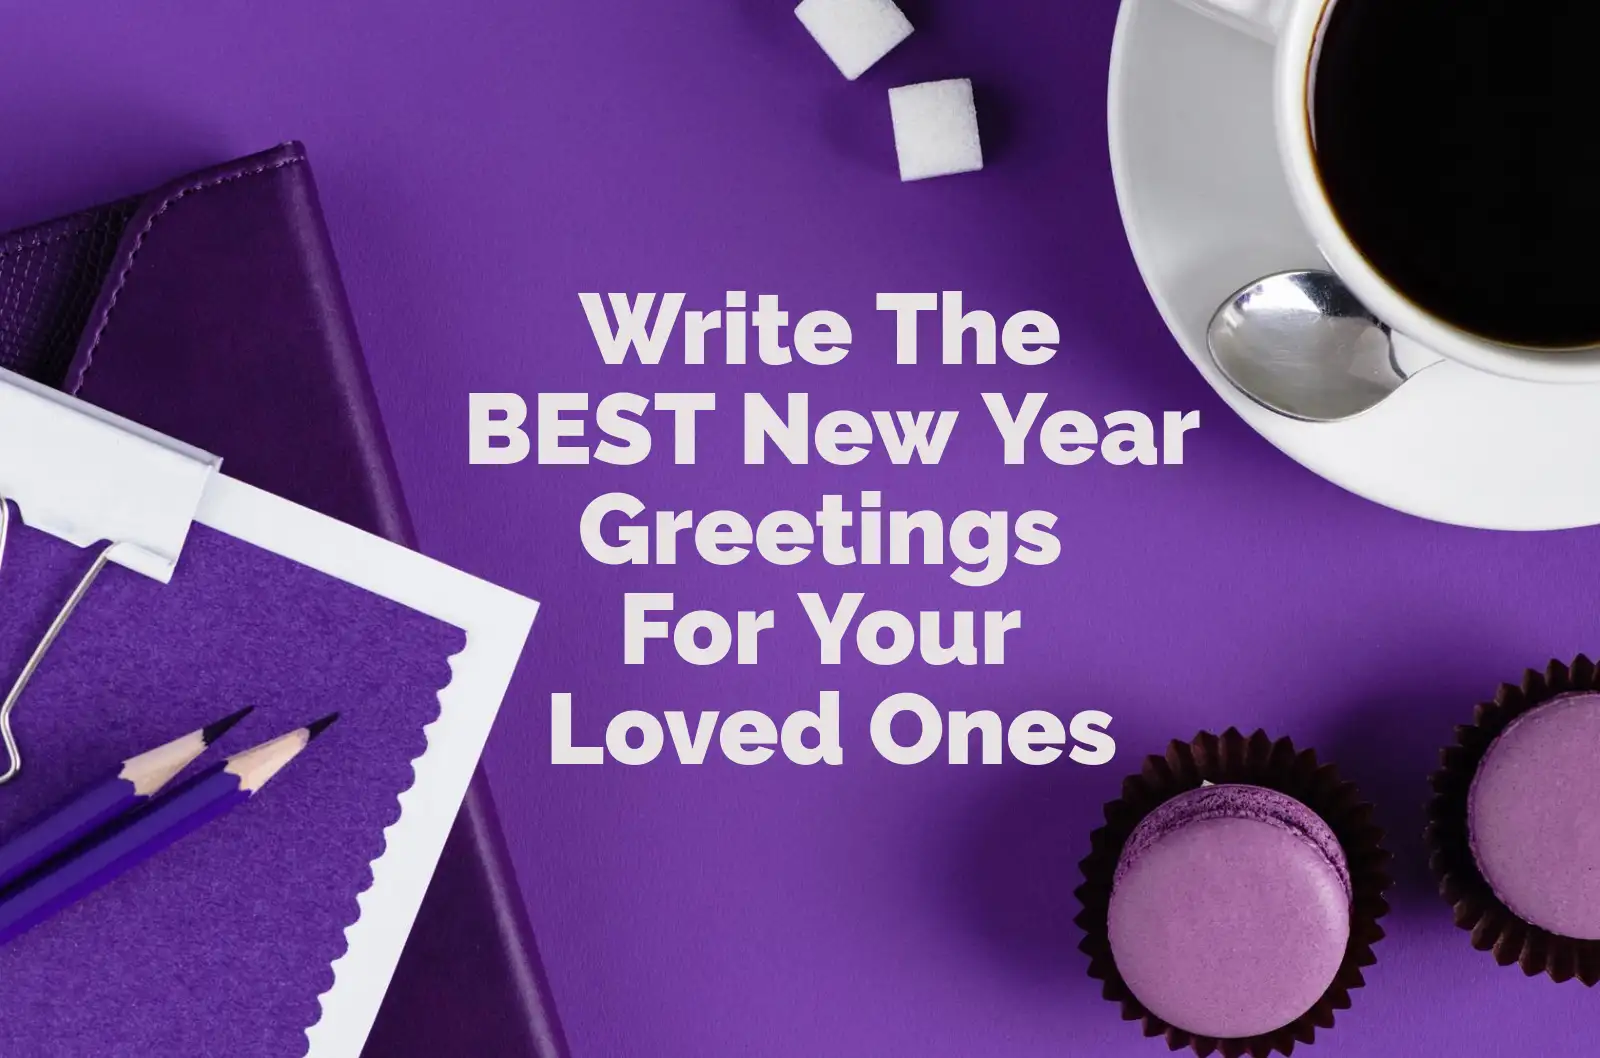 Write The BEST New Year Greetings For Your Loved Ones Banner.webp